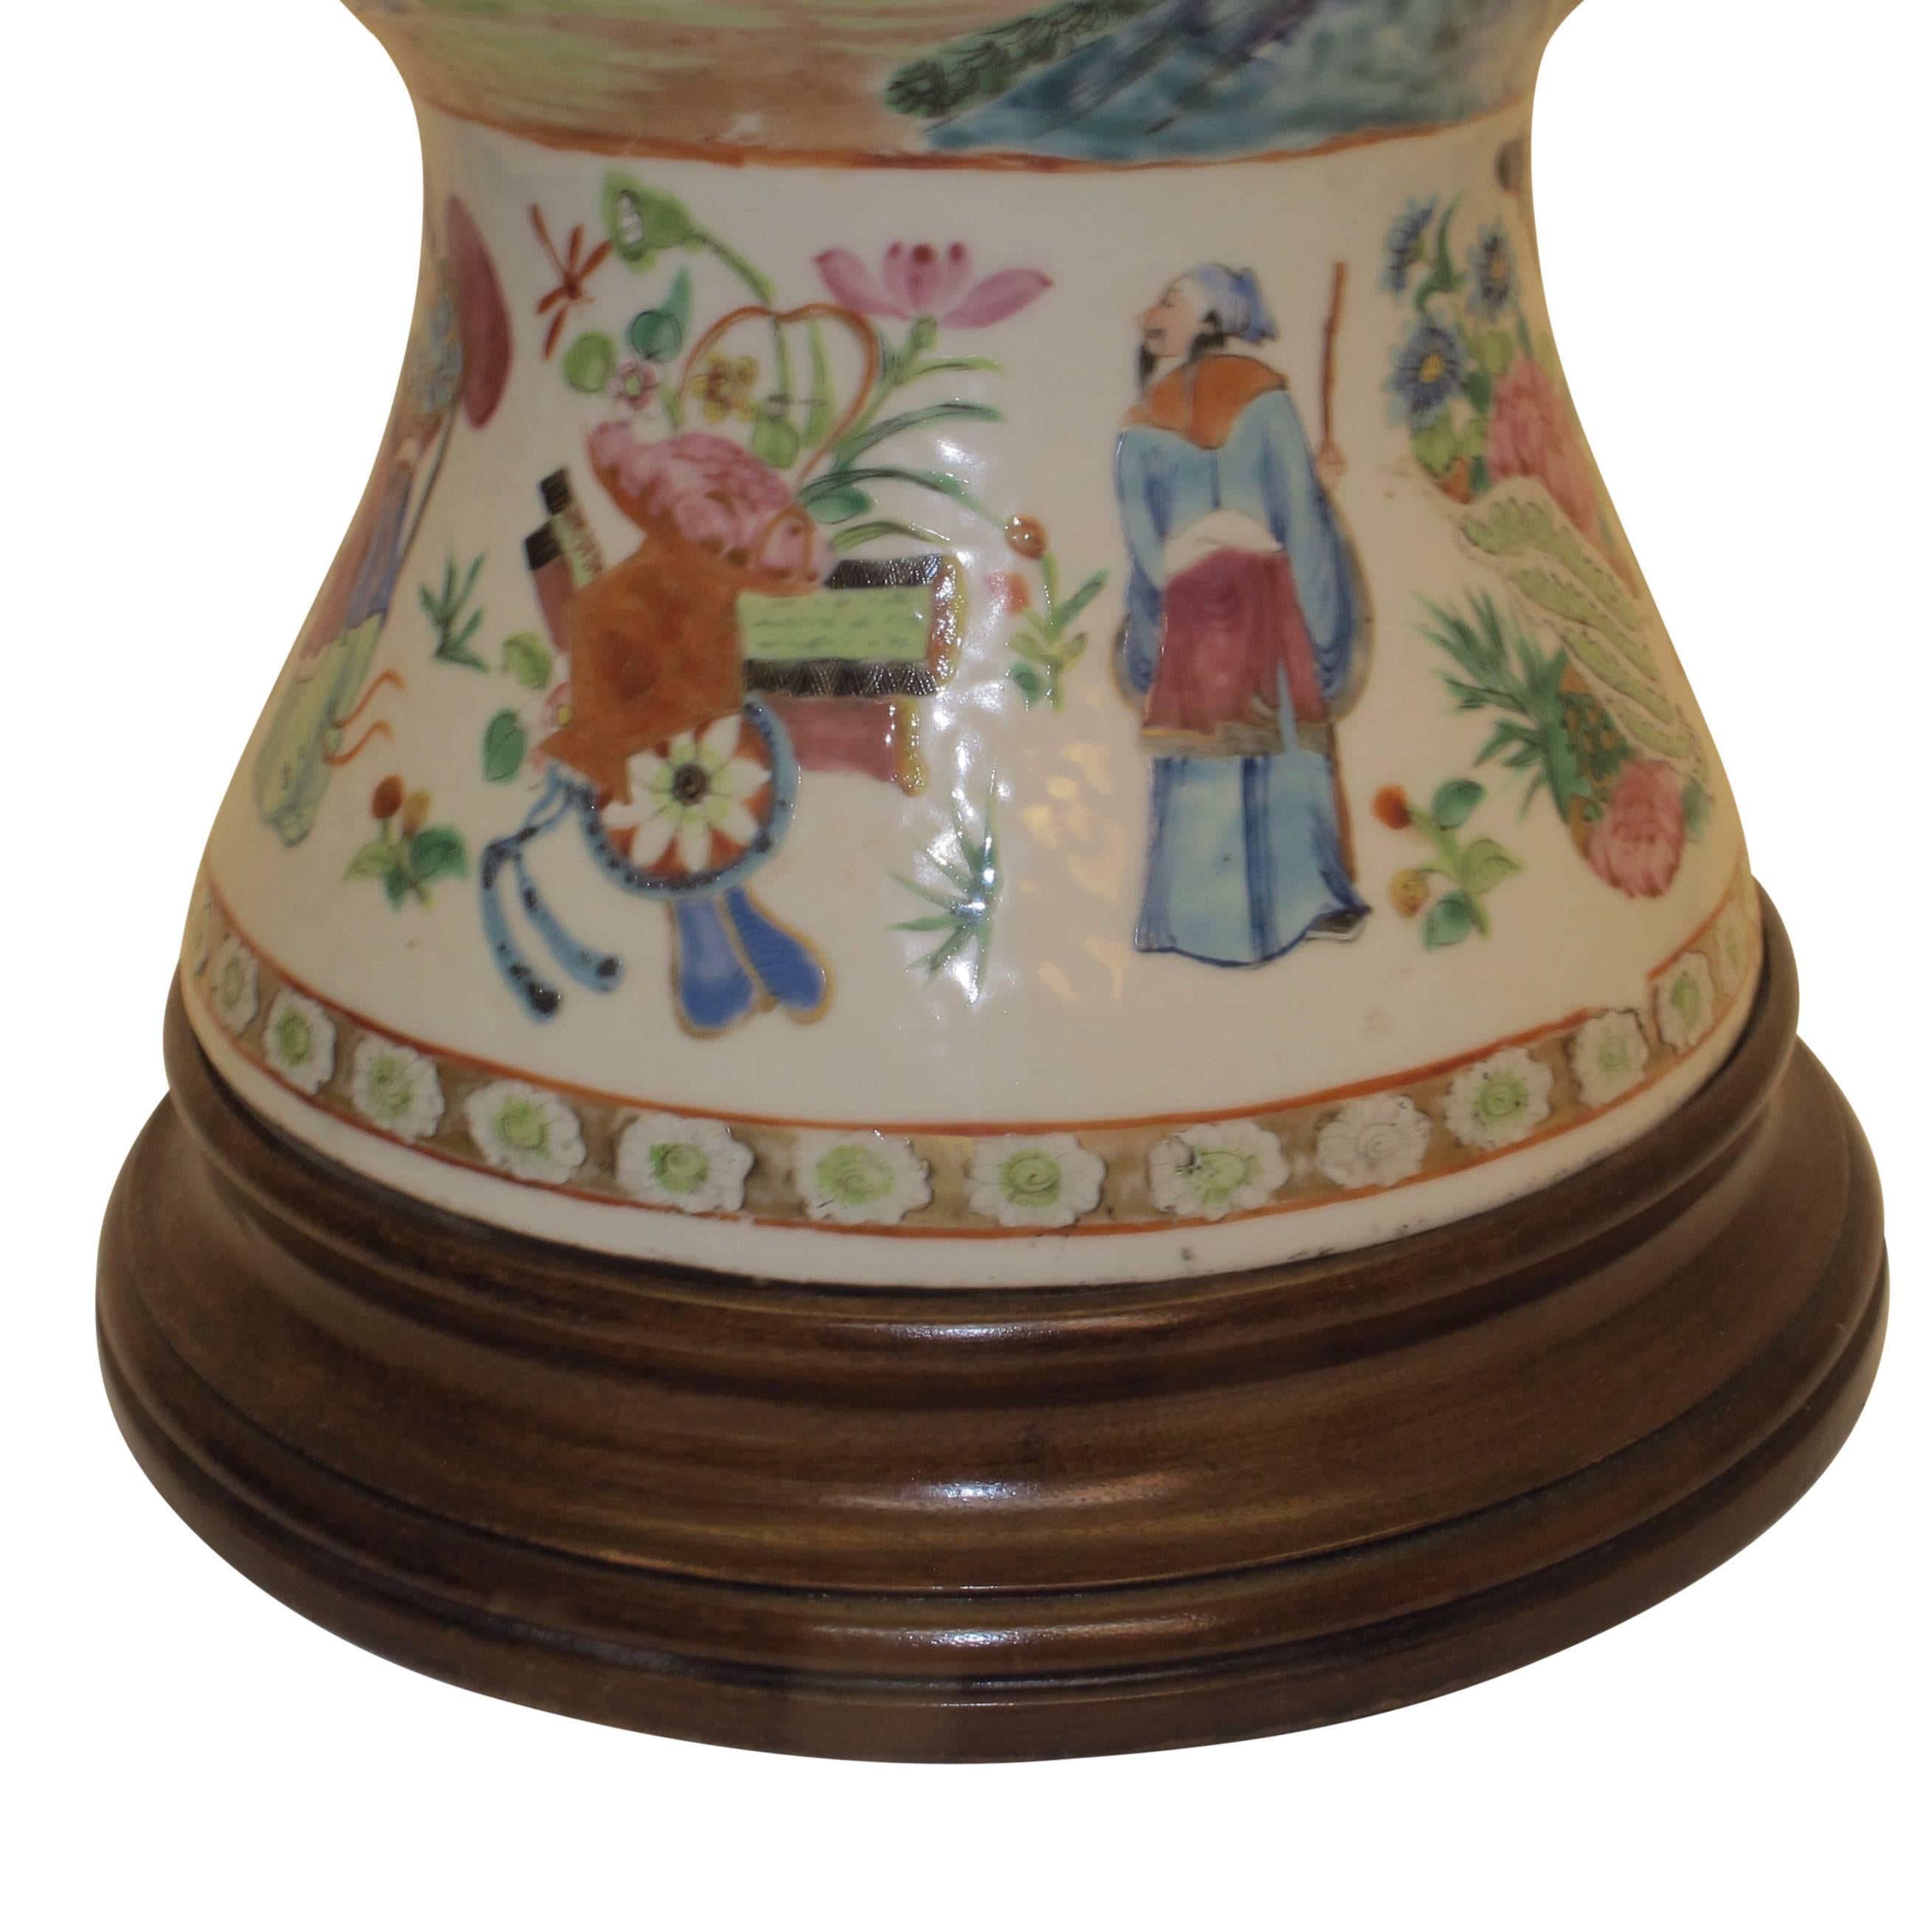 Porcelain Famille Rose Vase Lamp with Hand Painted Figures, Chinese 19th Century